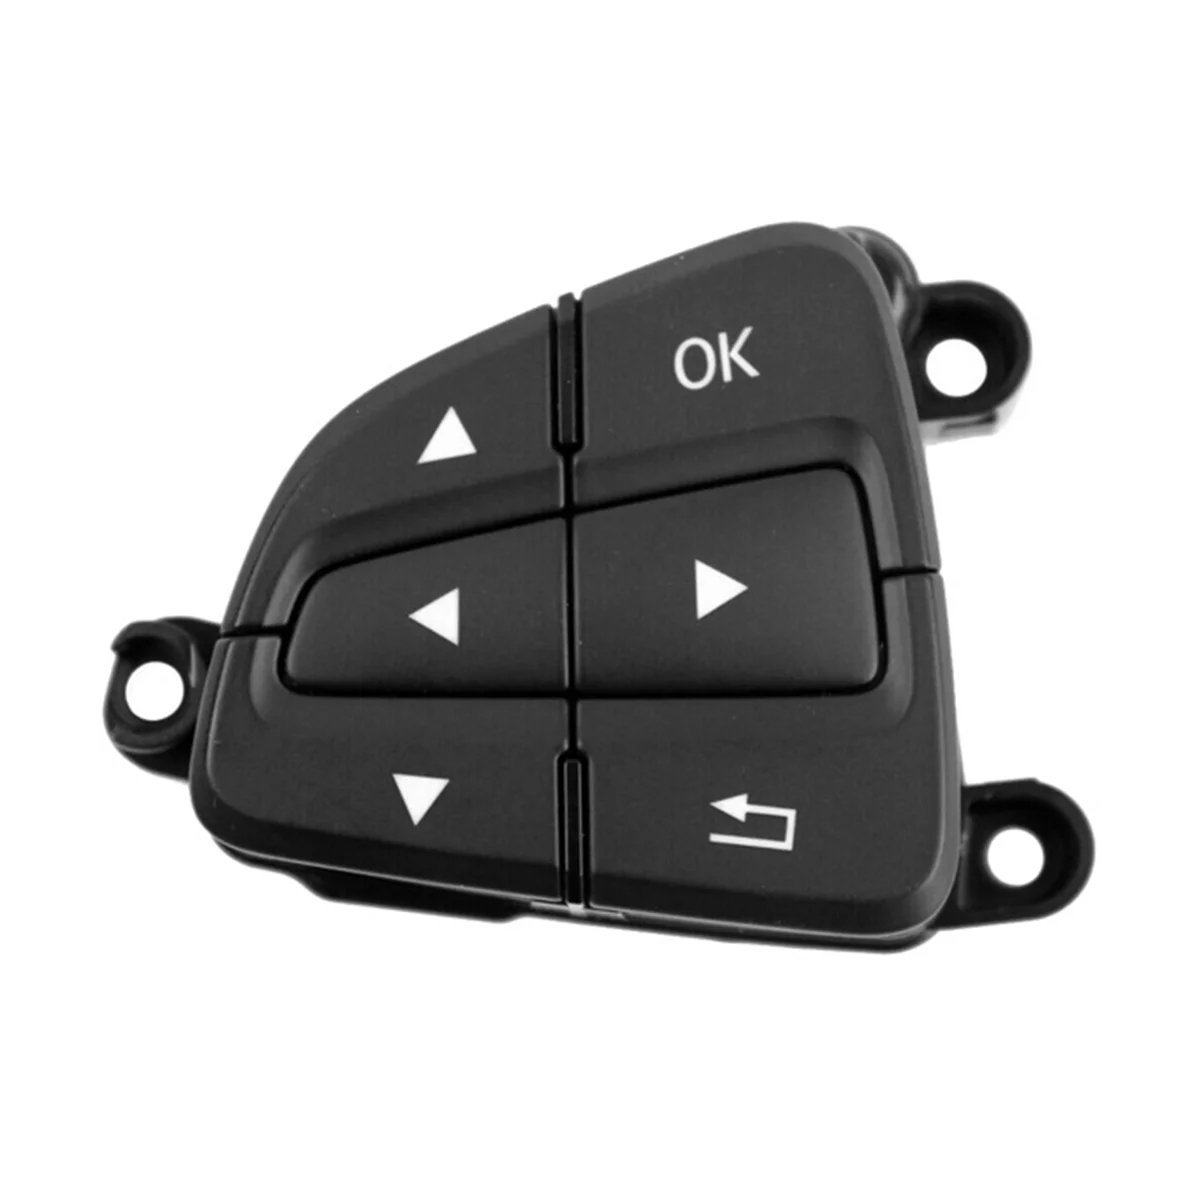 

A0999050600 Automobile Steering Wheel Multi-Function Switch Button Auto Parts For - GLS GLA